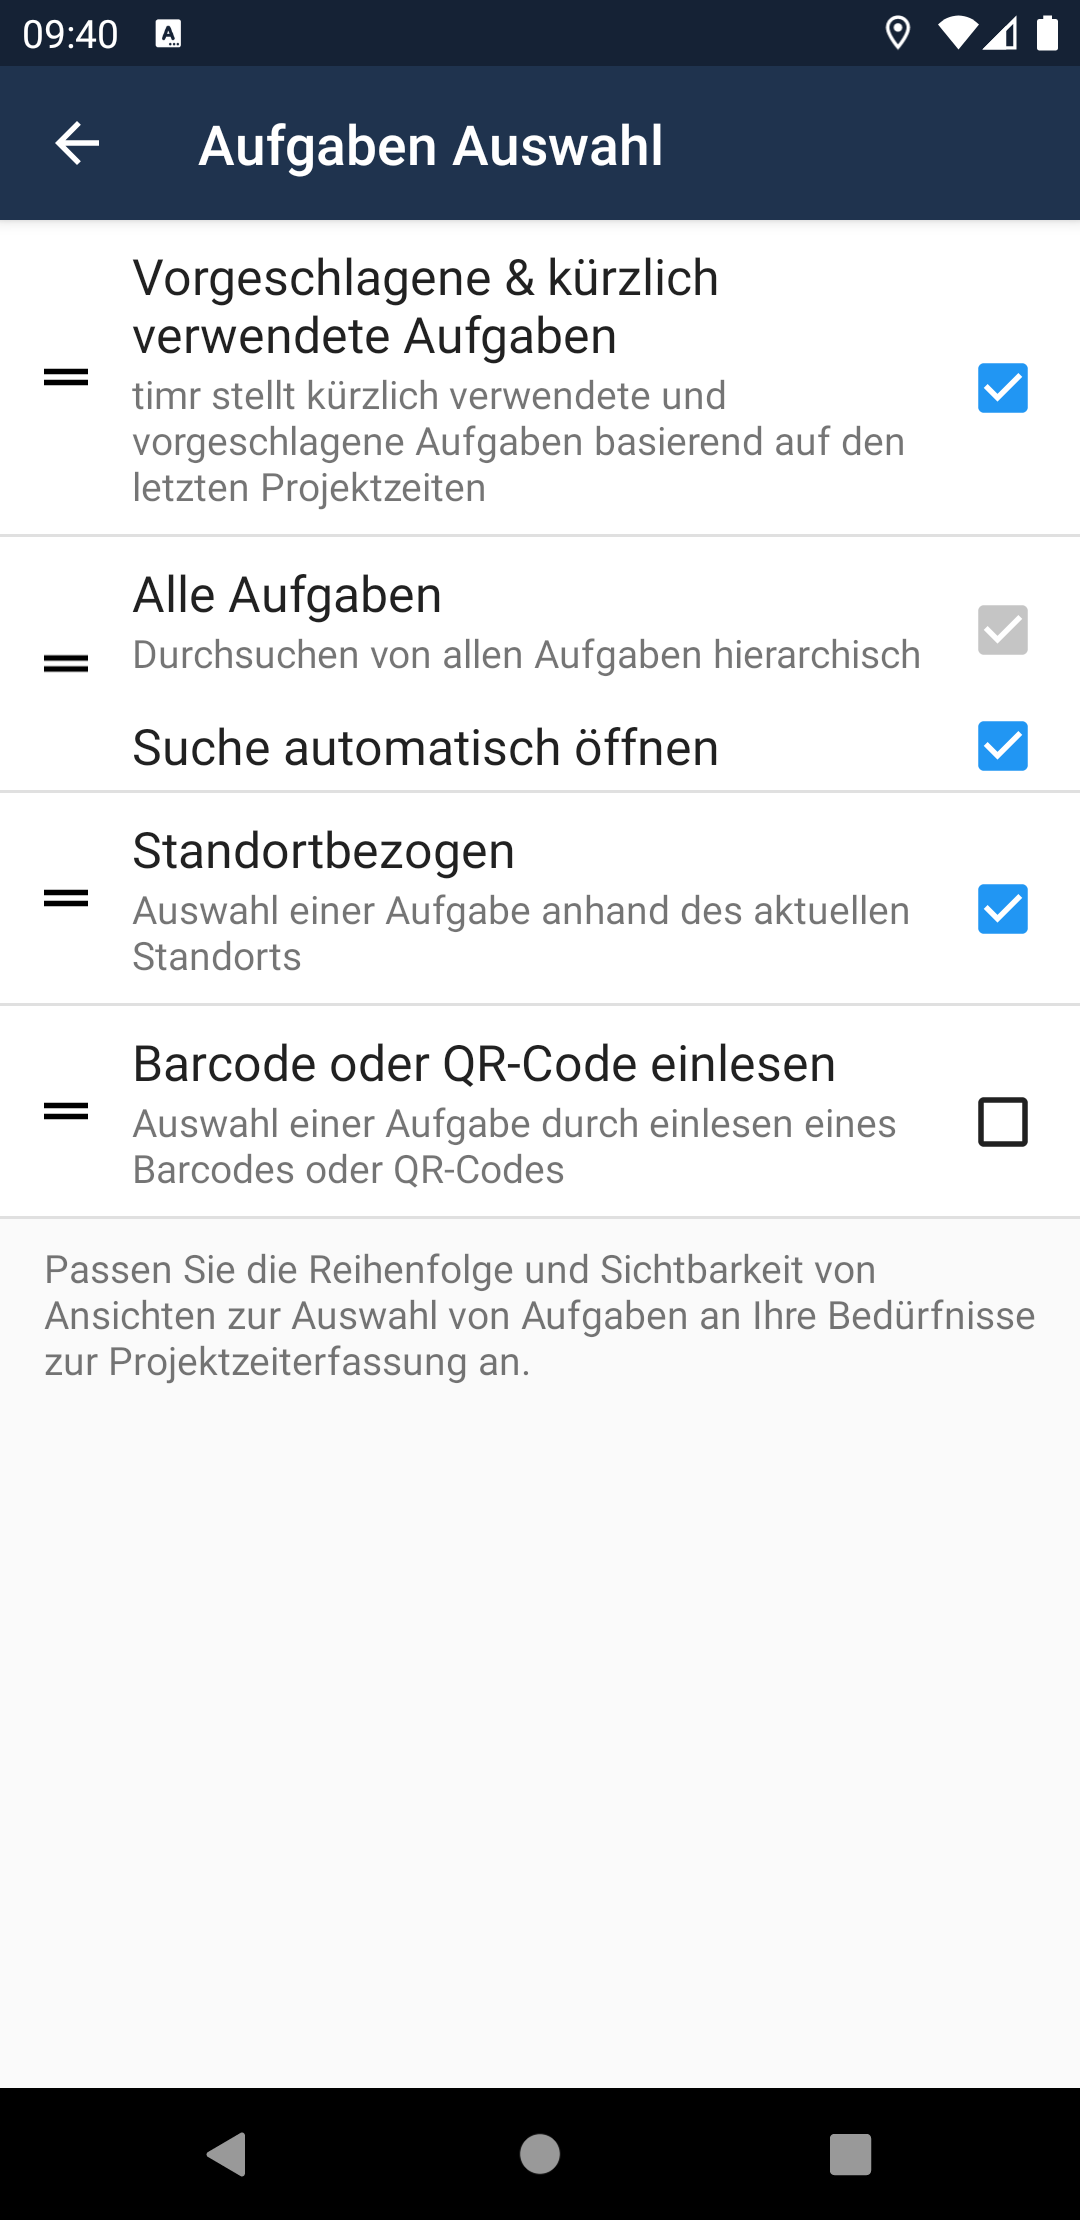 Aufgabenauswahl_Android.png